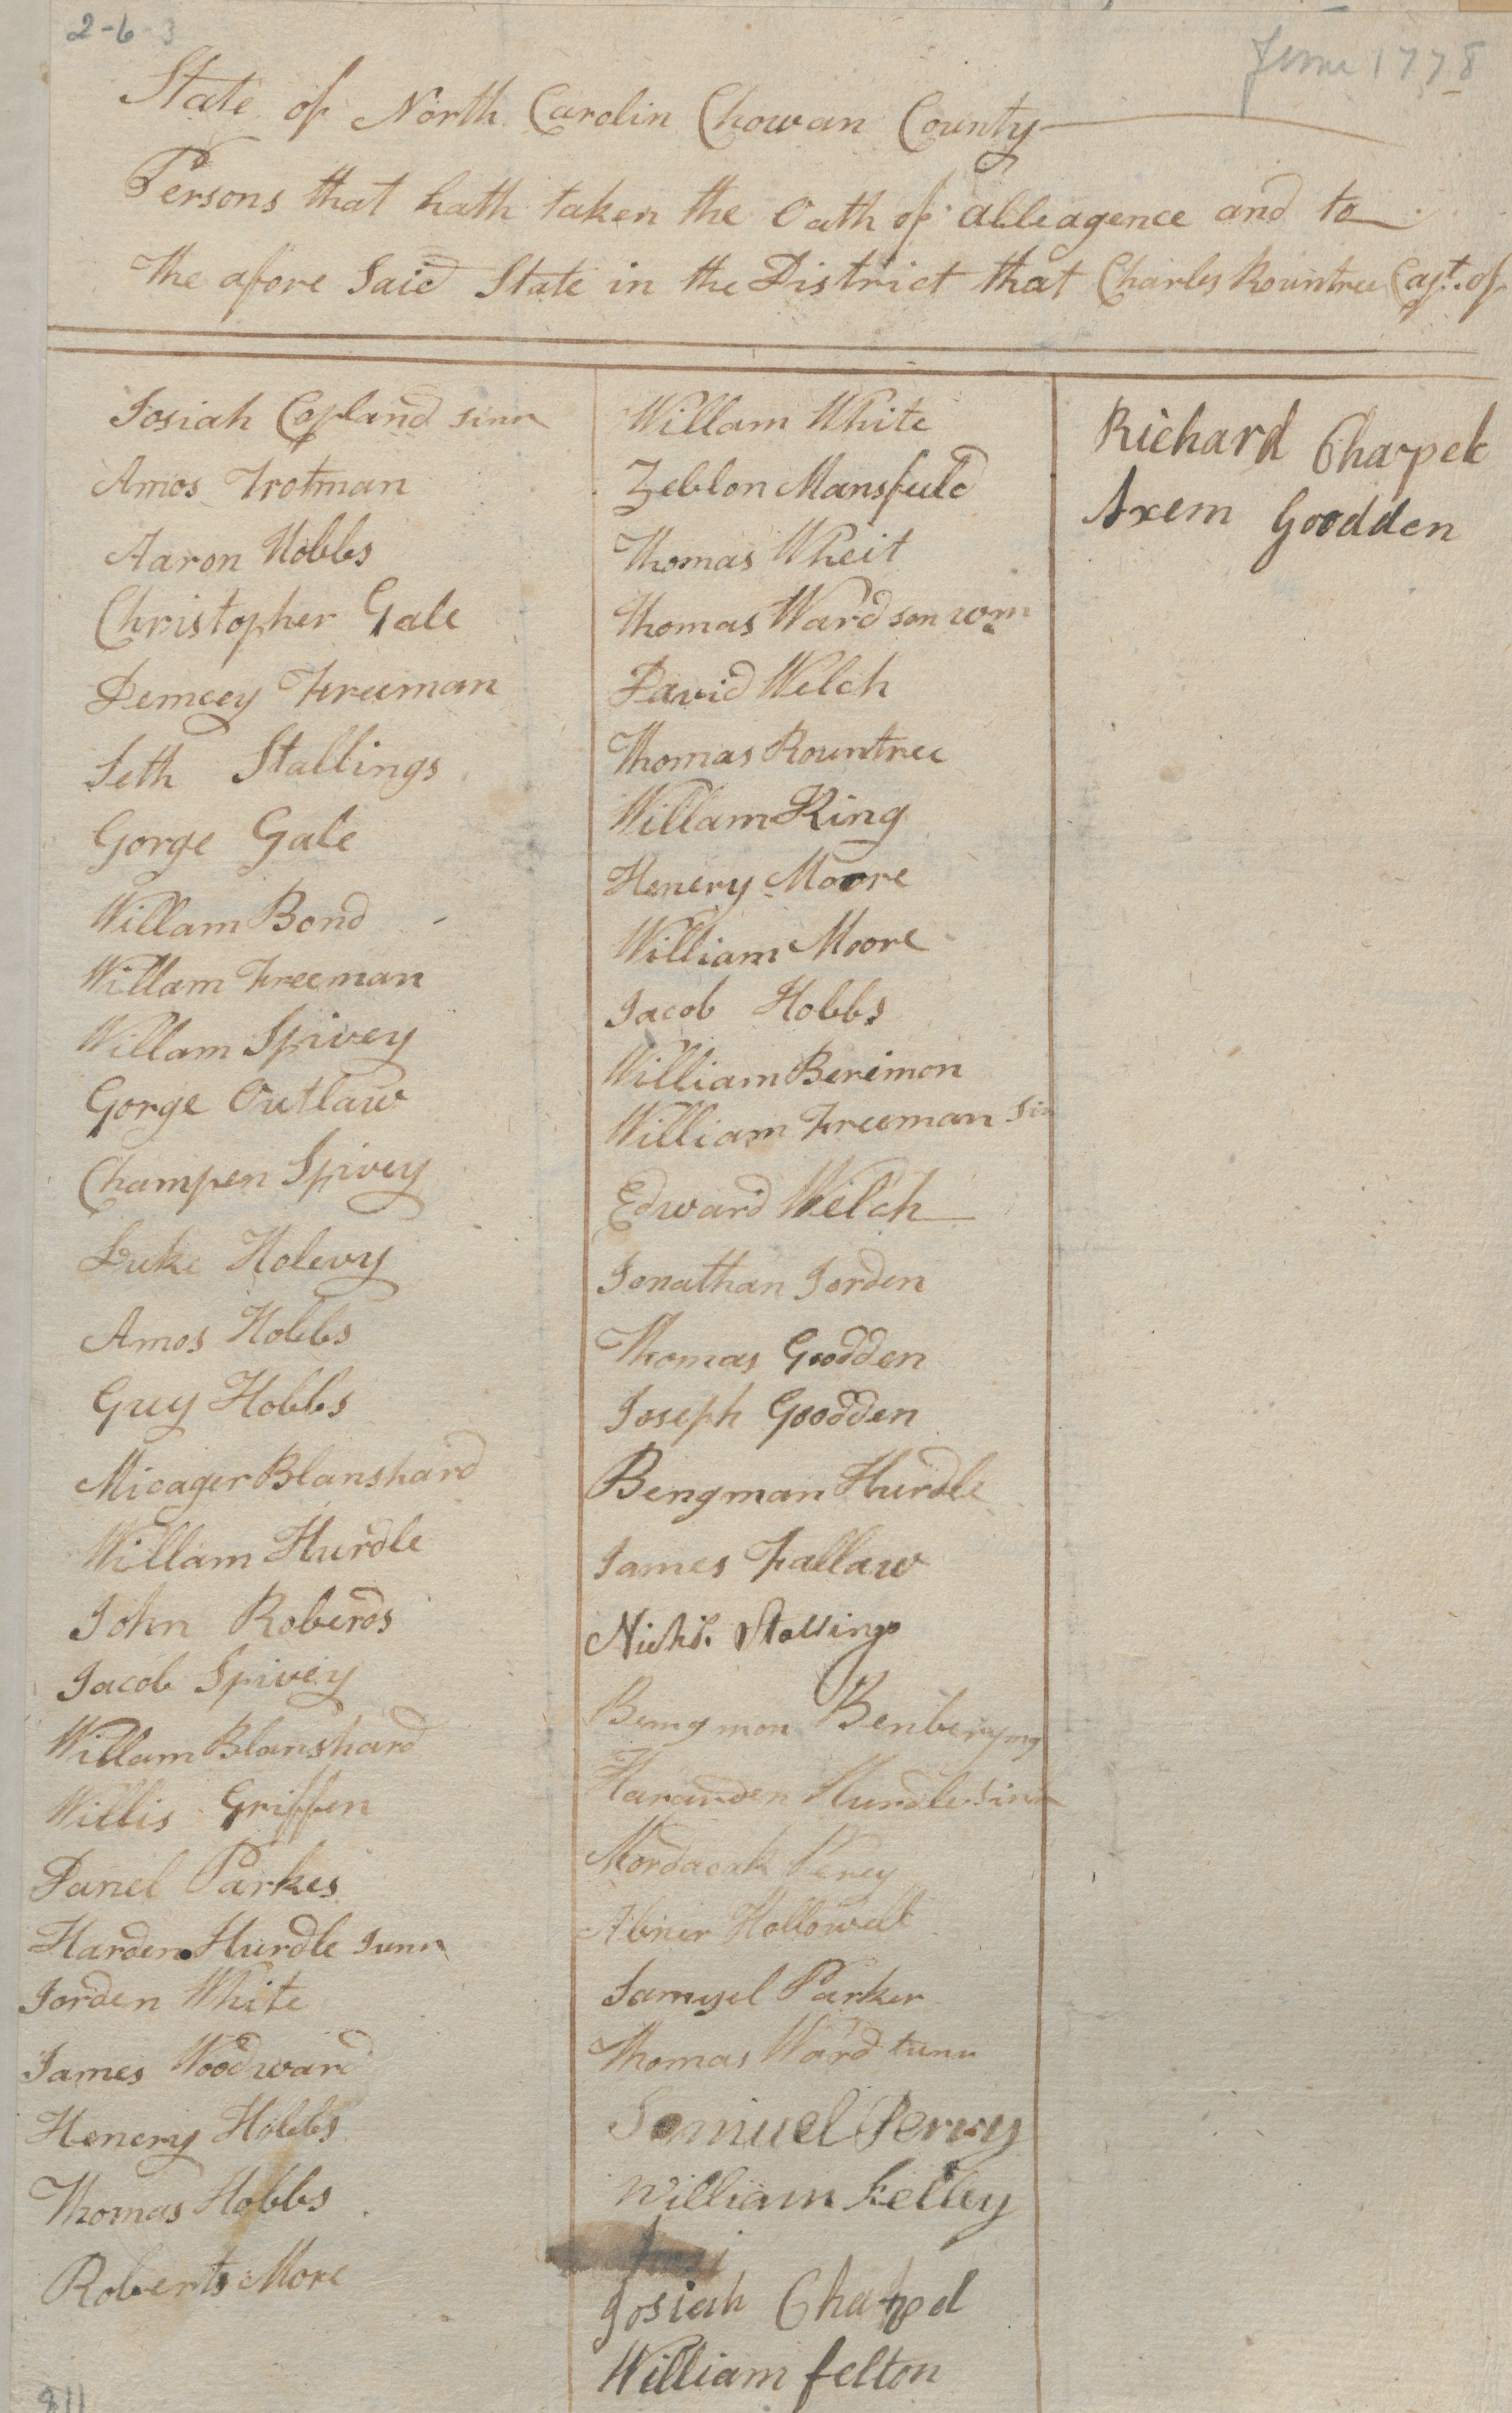 List of People Swearing the Oath of Allegiance to the State of North Carolina in Chowan County, circa June 1778, page 1